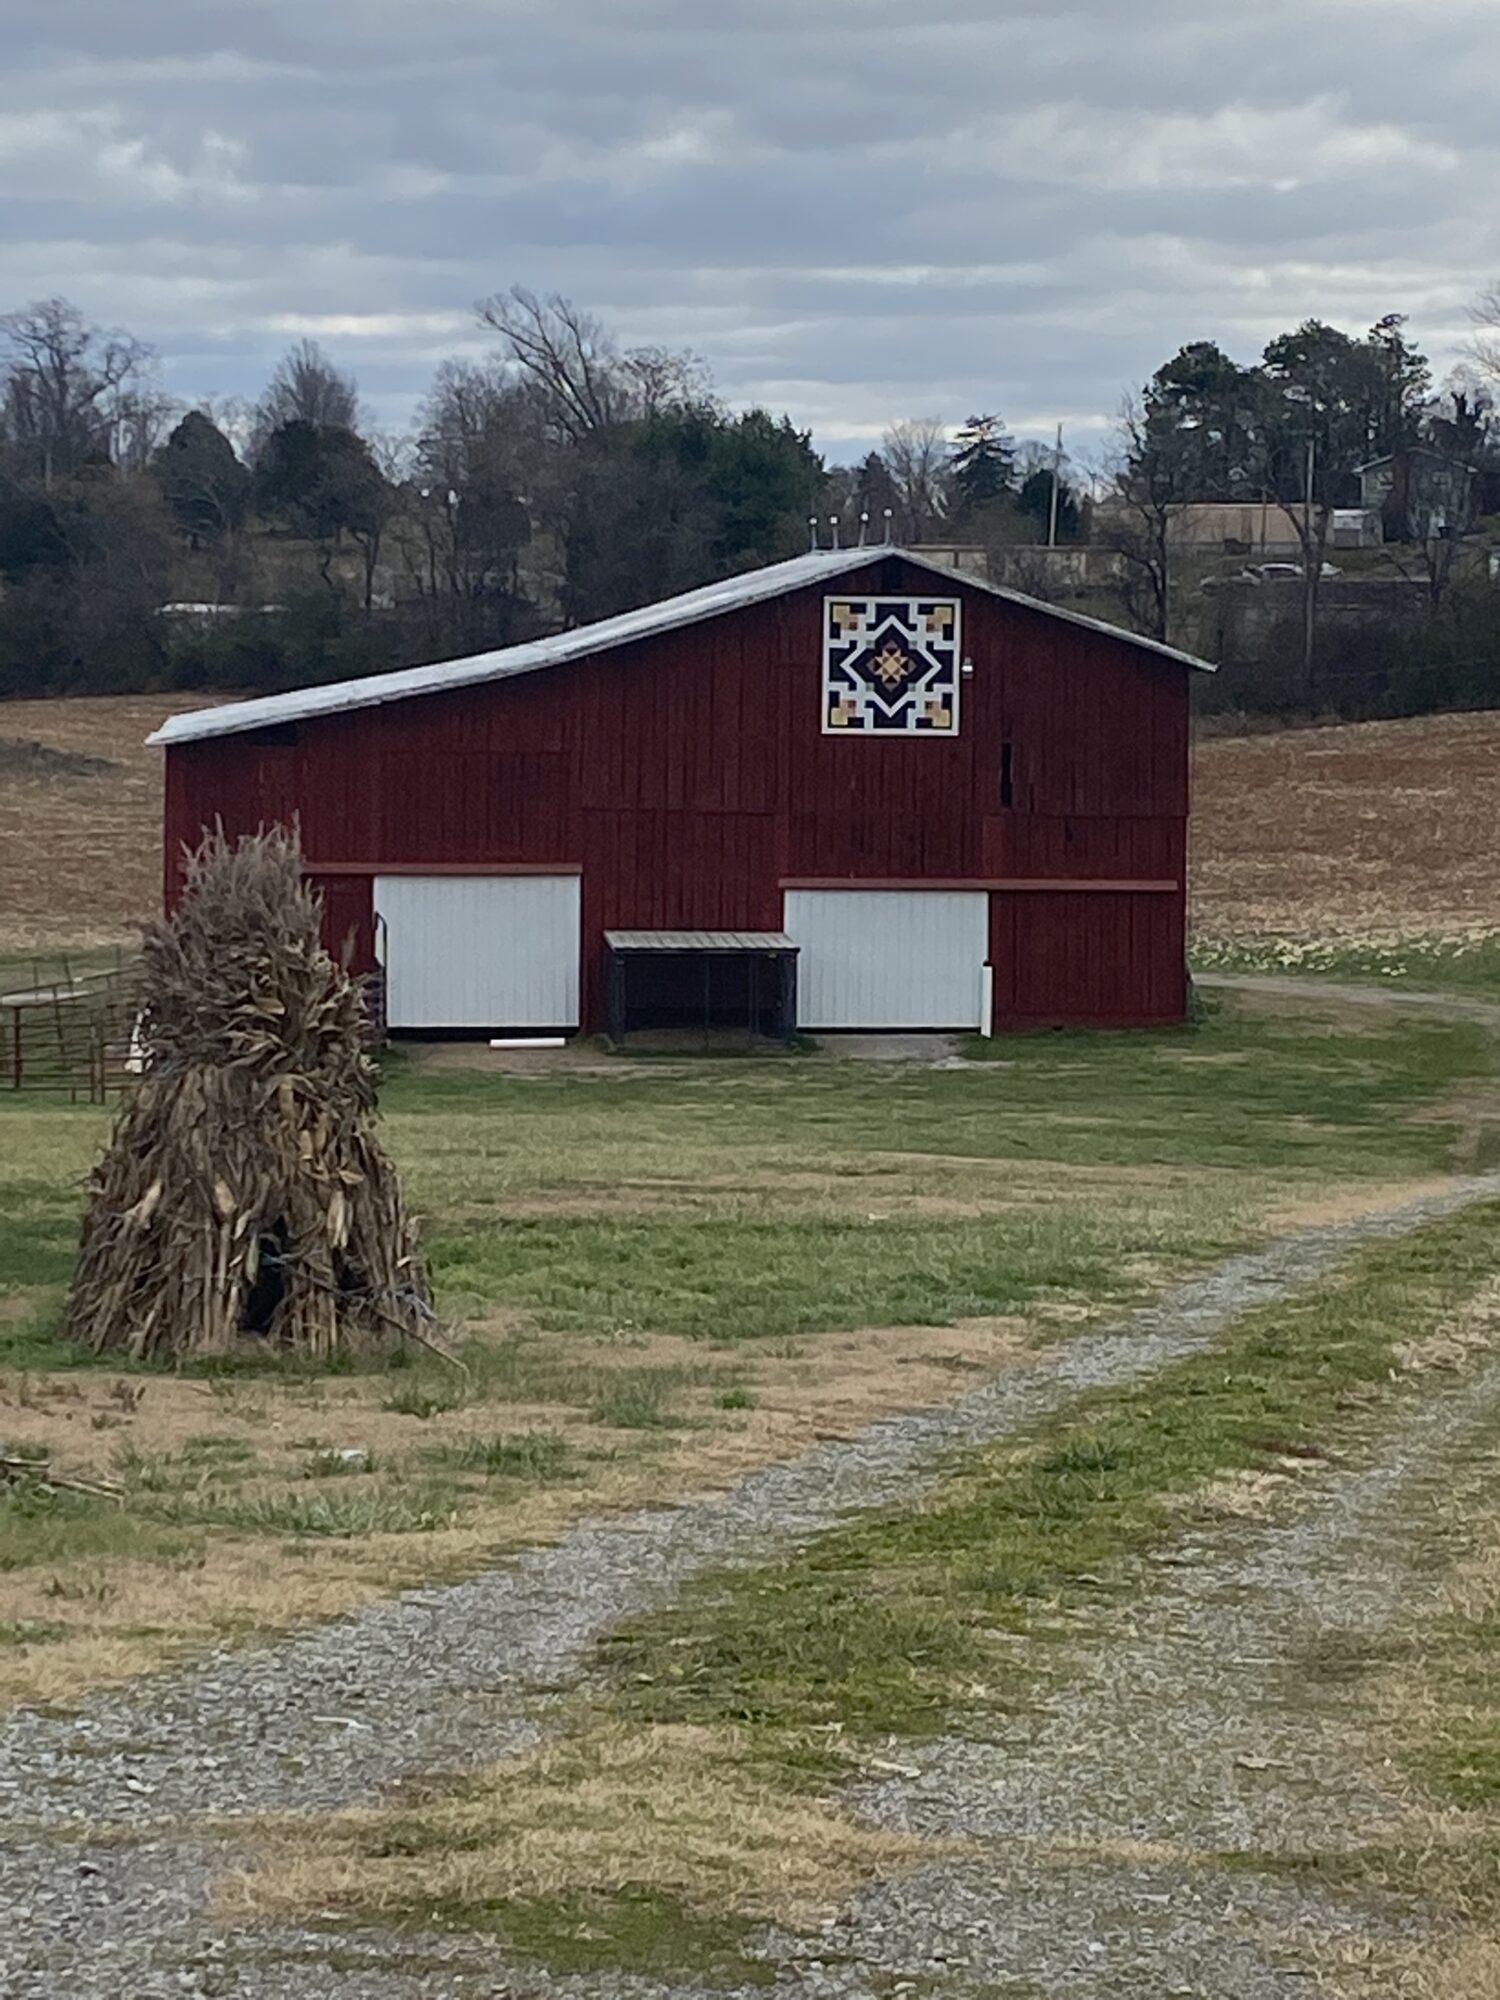 Barn Quilt, I’m sure you’ve seen Barns and sometimes buildings that have that square quilt pattern on the side of it. So what exactly is a barn quilt? #QuiltBarns #Quilts #BarnQuilt (Echo Valley Corn Maze - Jefferson City, TN)